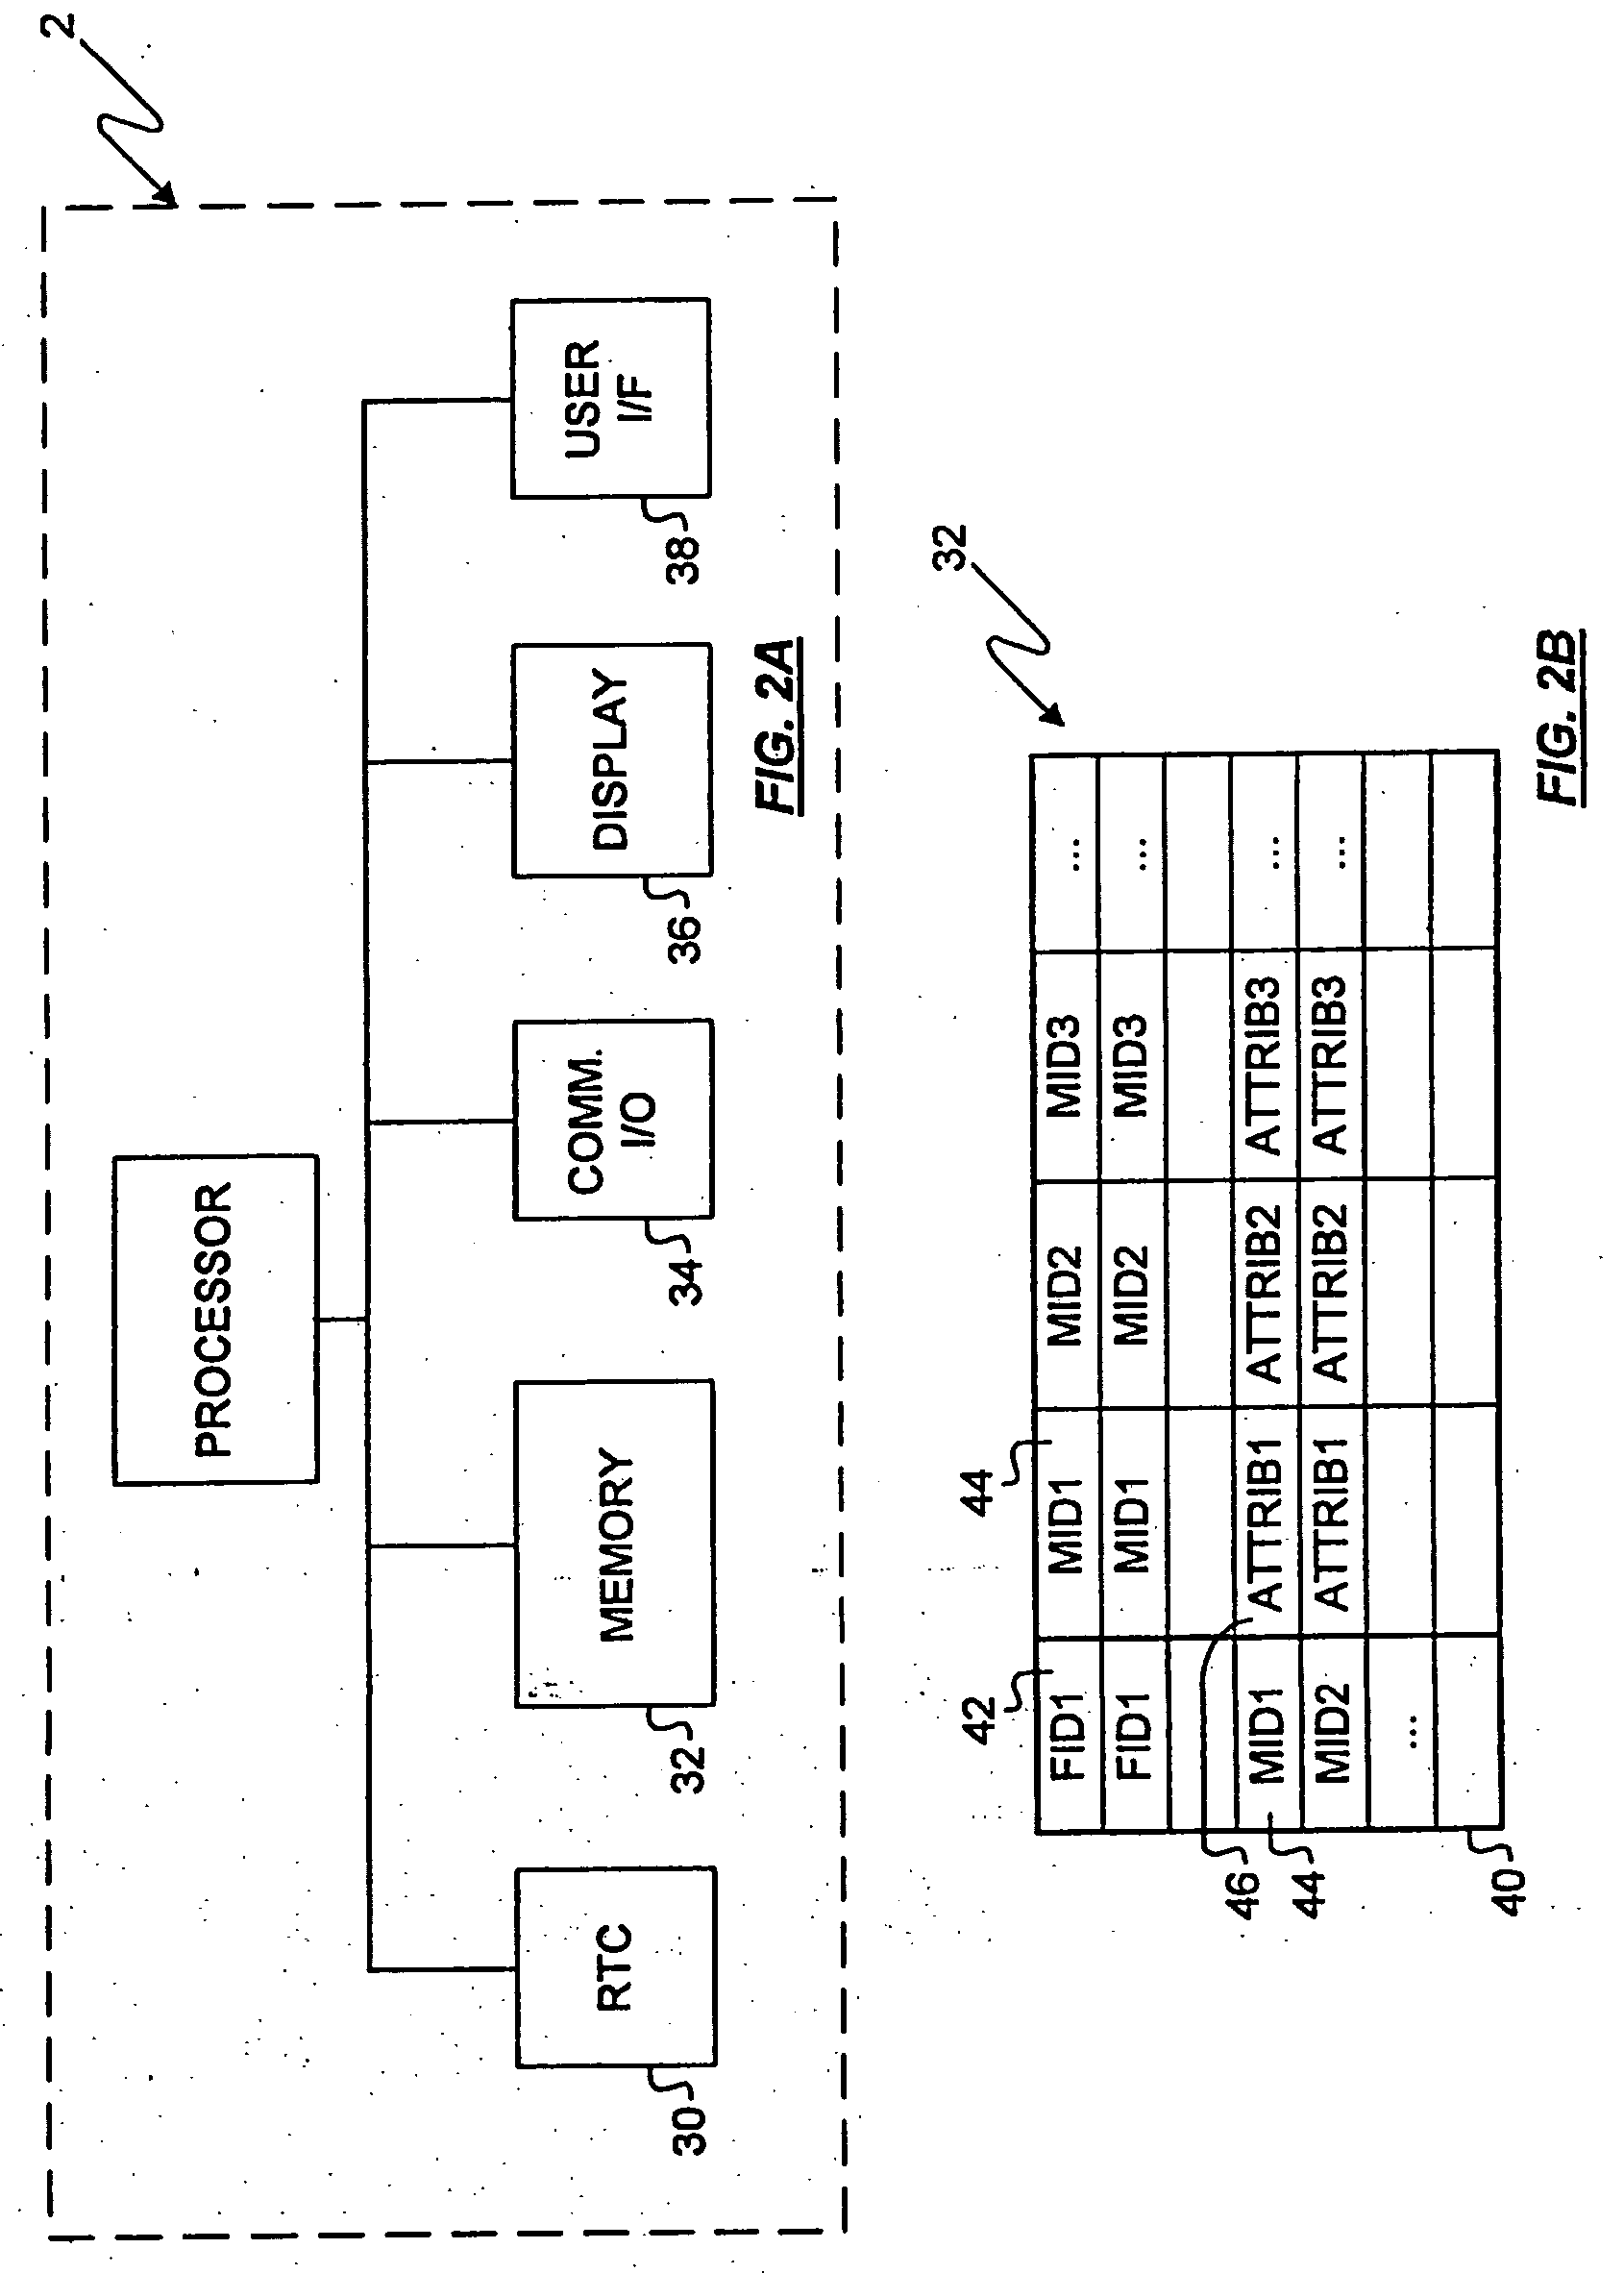 Method for introduction and linking of imaging appliances